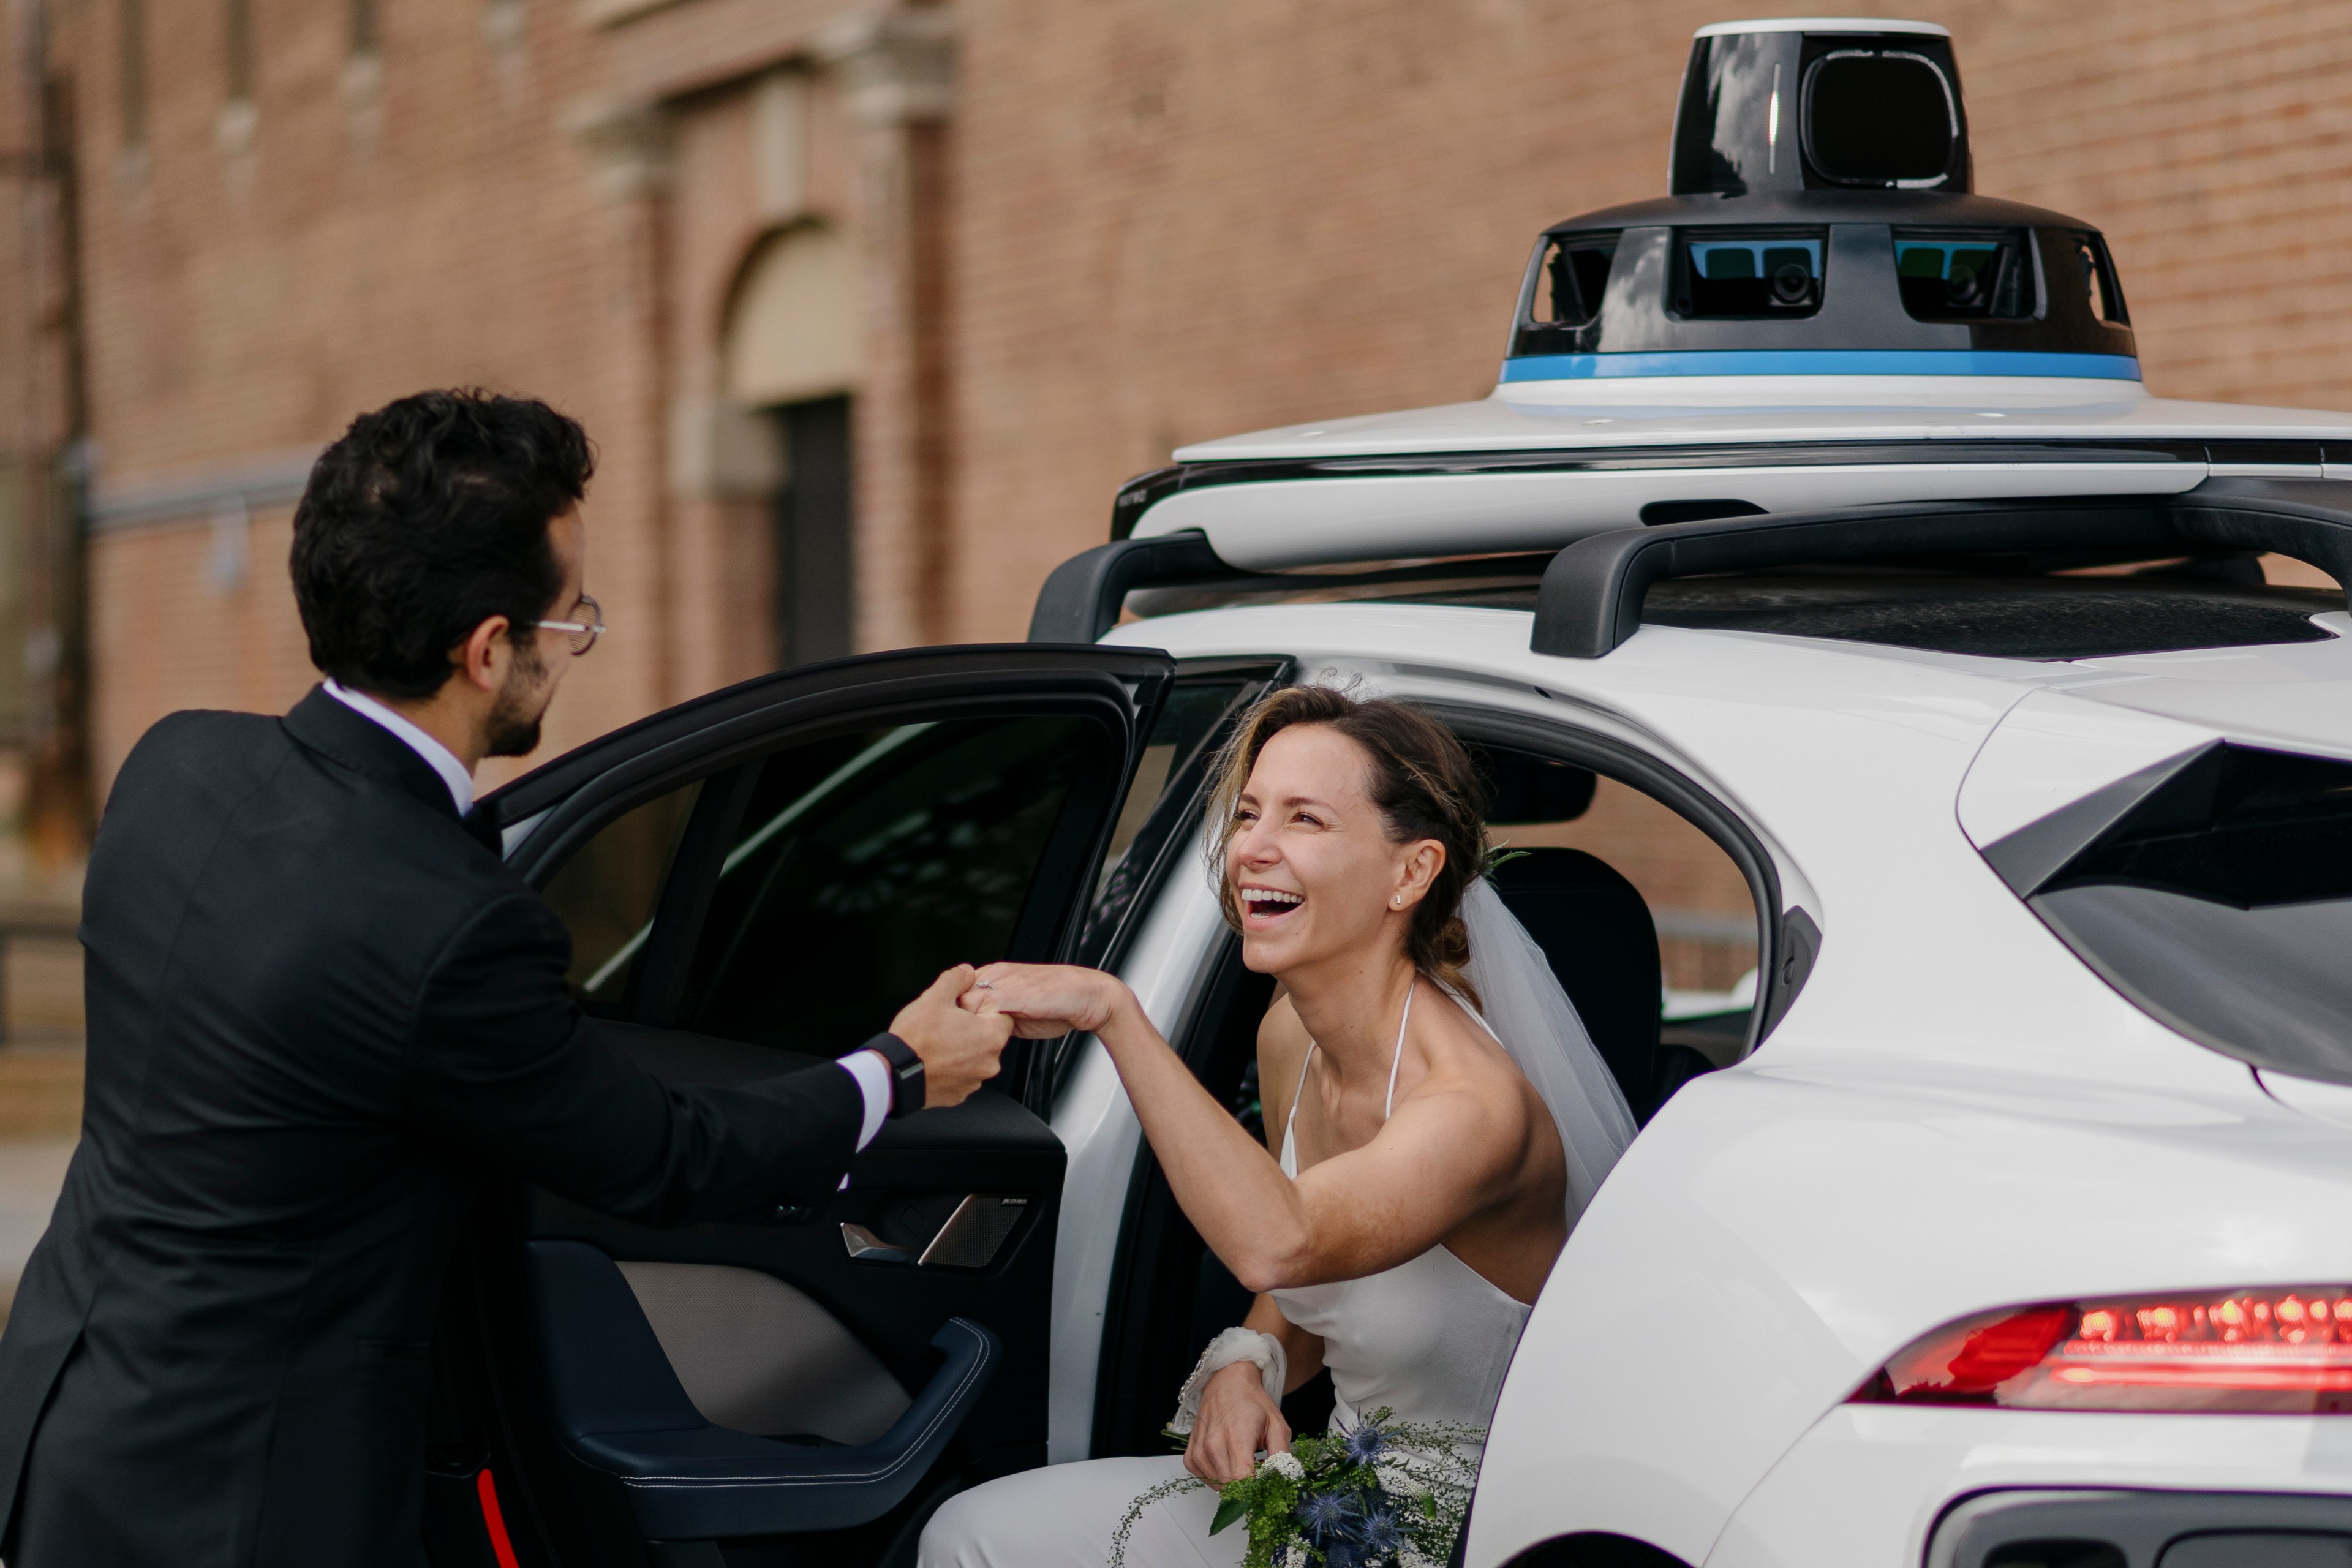 A bride in a self-driving car, with a sensor-laden roof, smiles and takes a man's hand as she gets out of the vehicle.